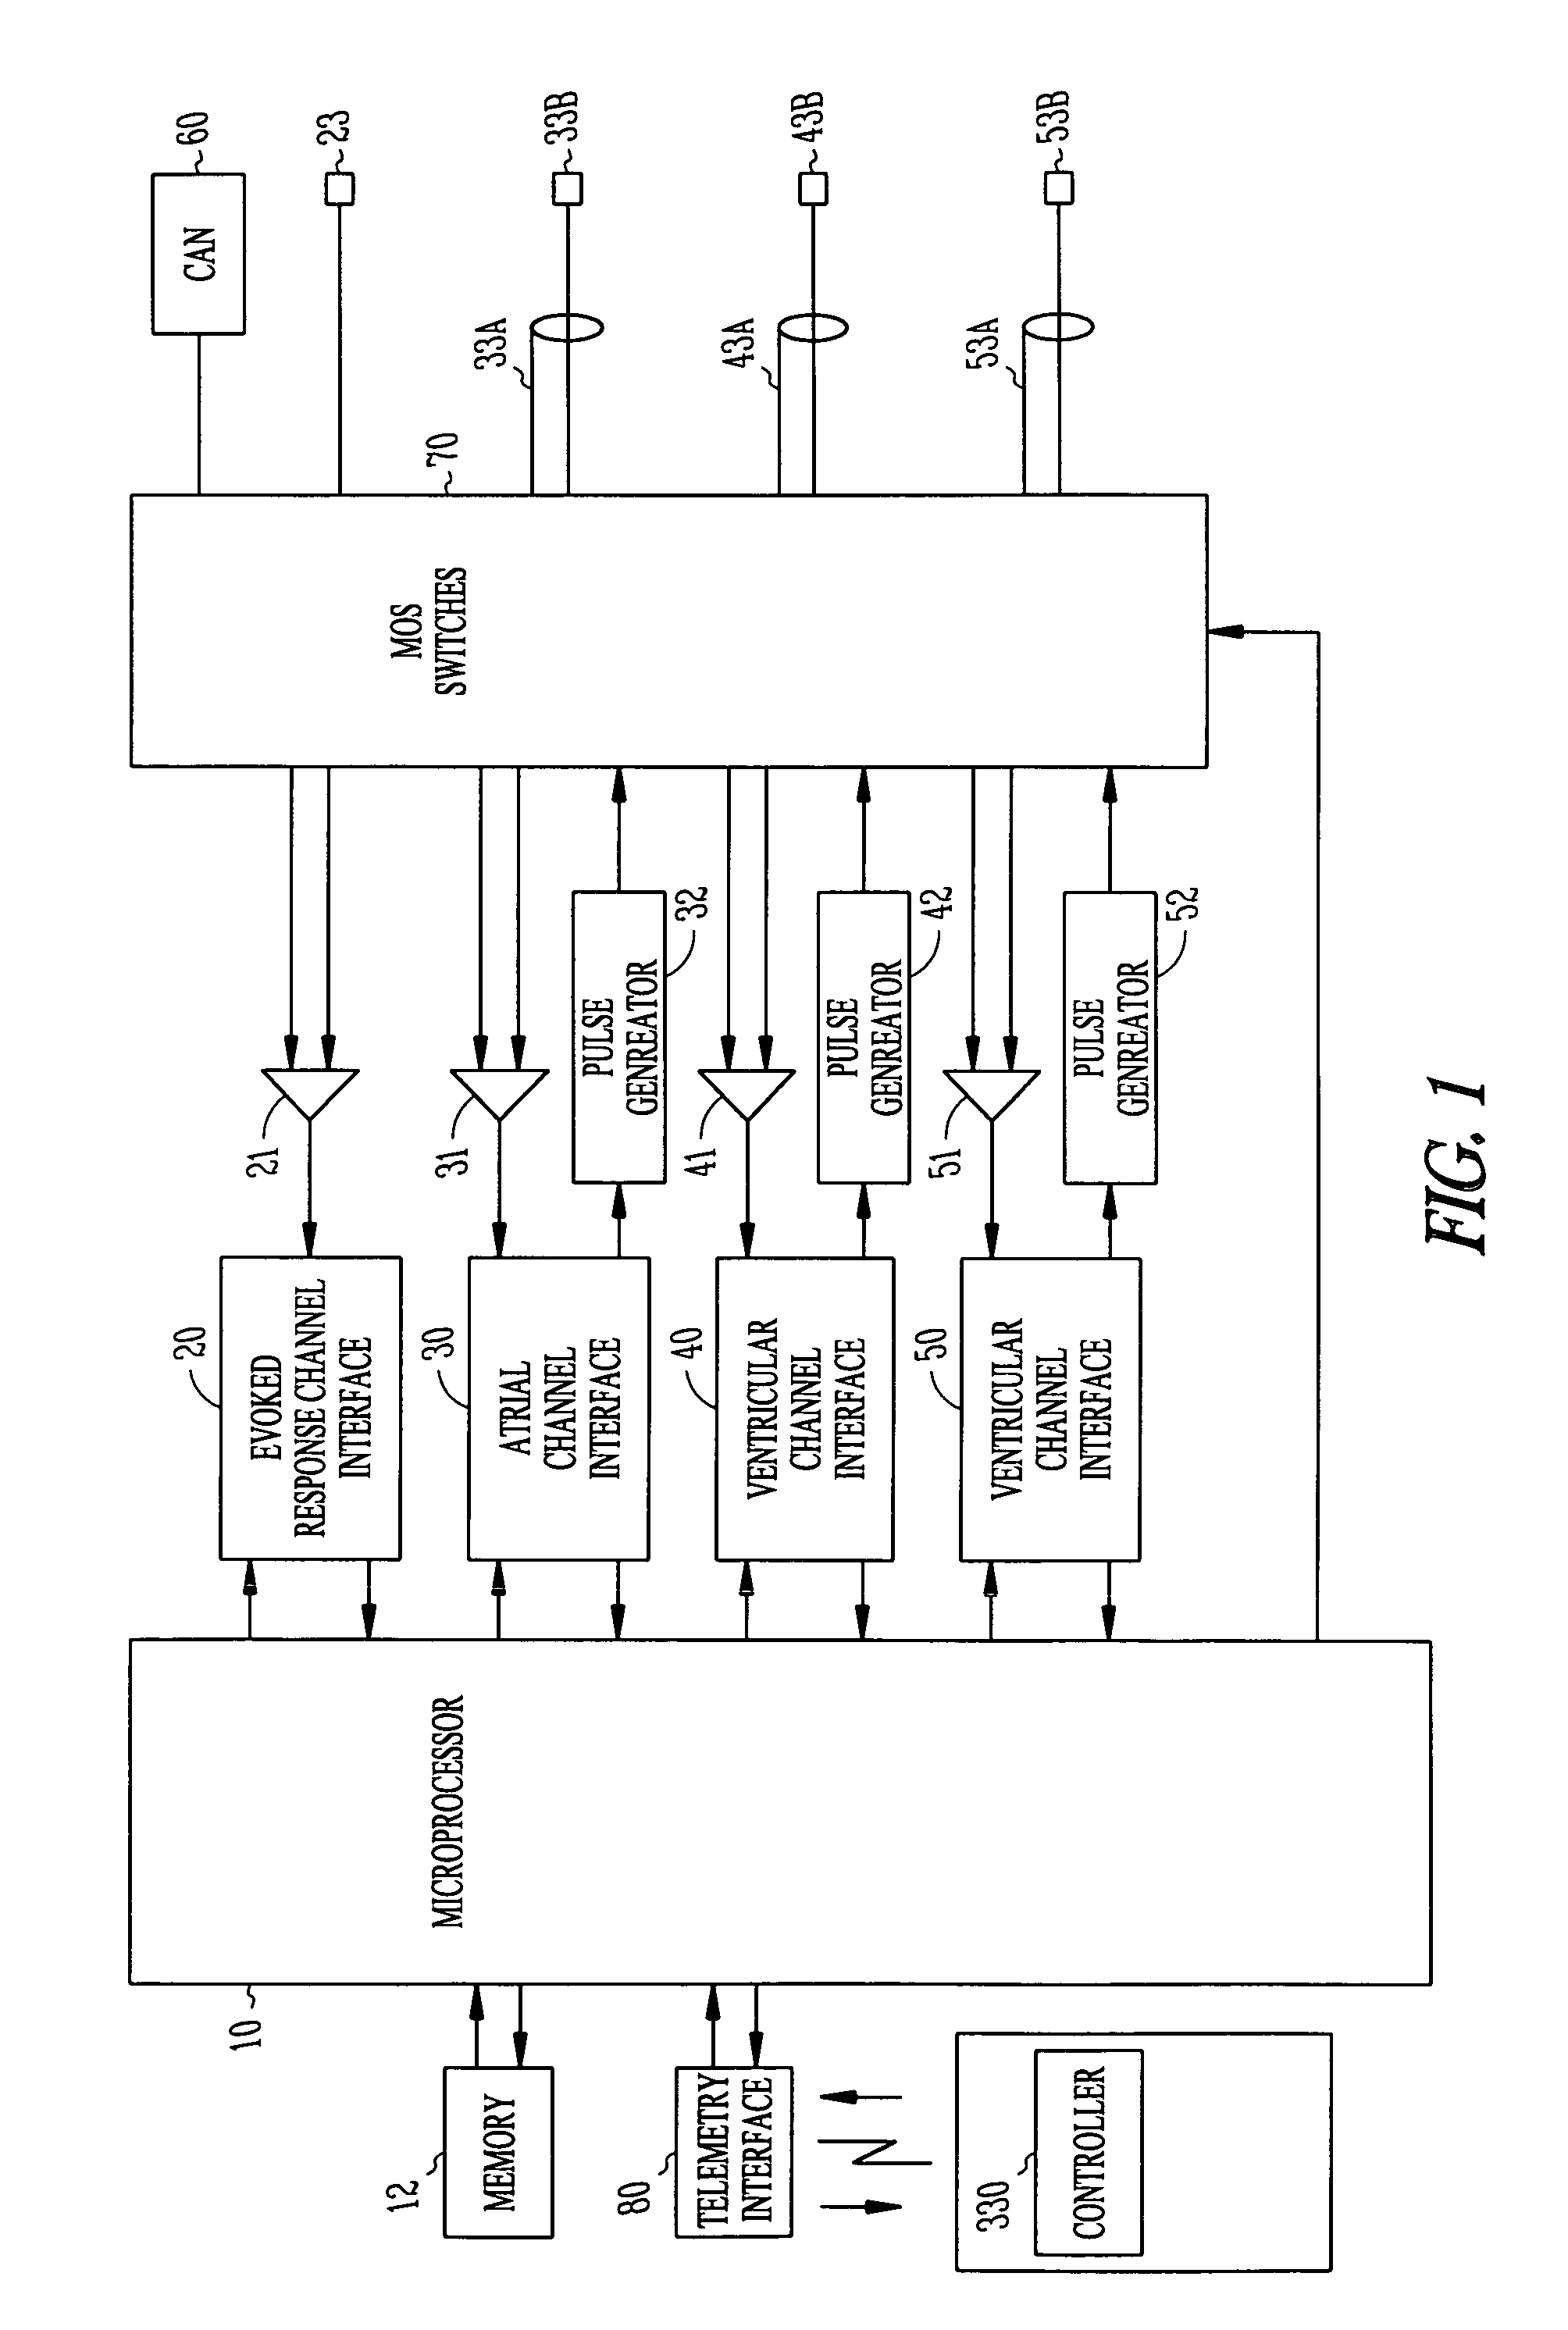 Method and apparatus for capture verification and threshold determination